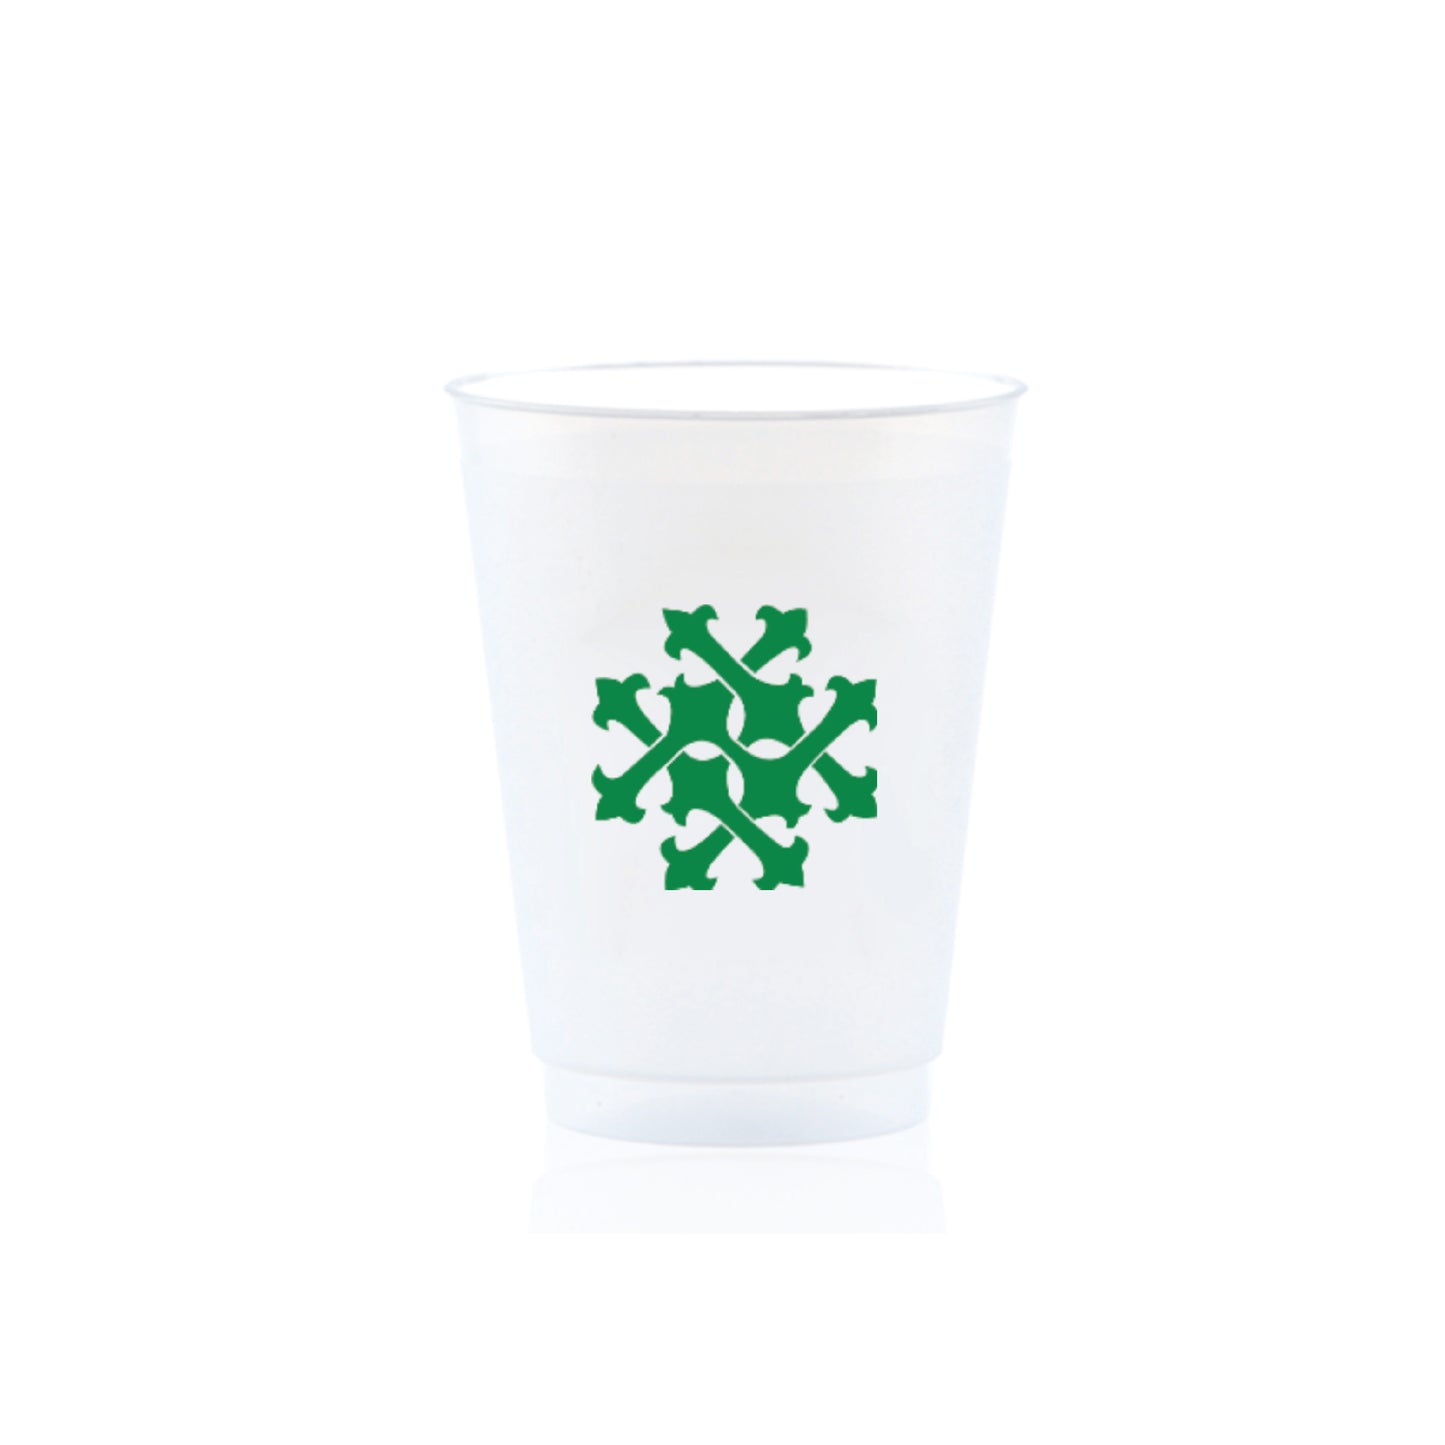 Personalized Cups   |   Duogram 2